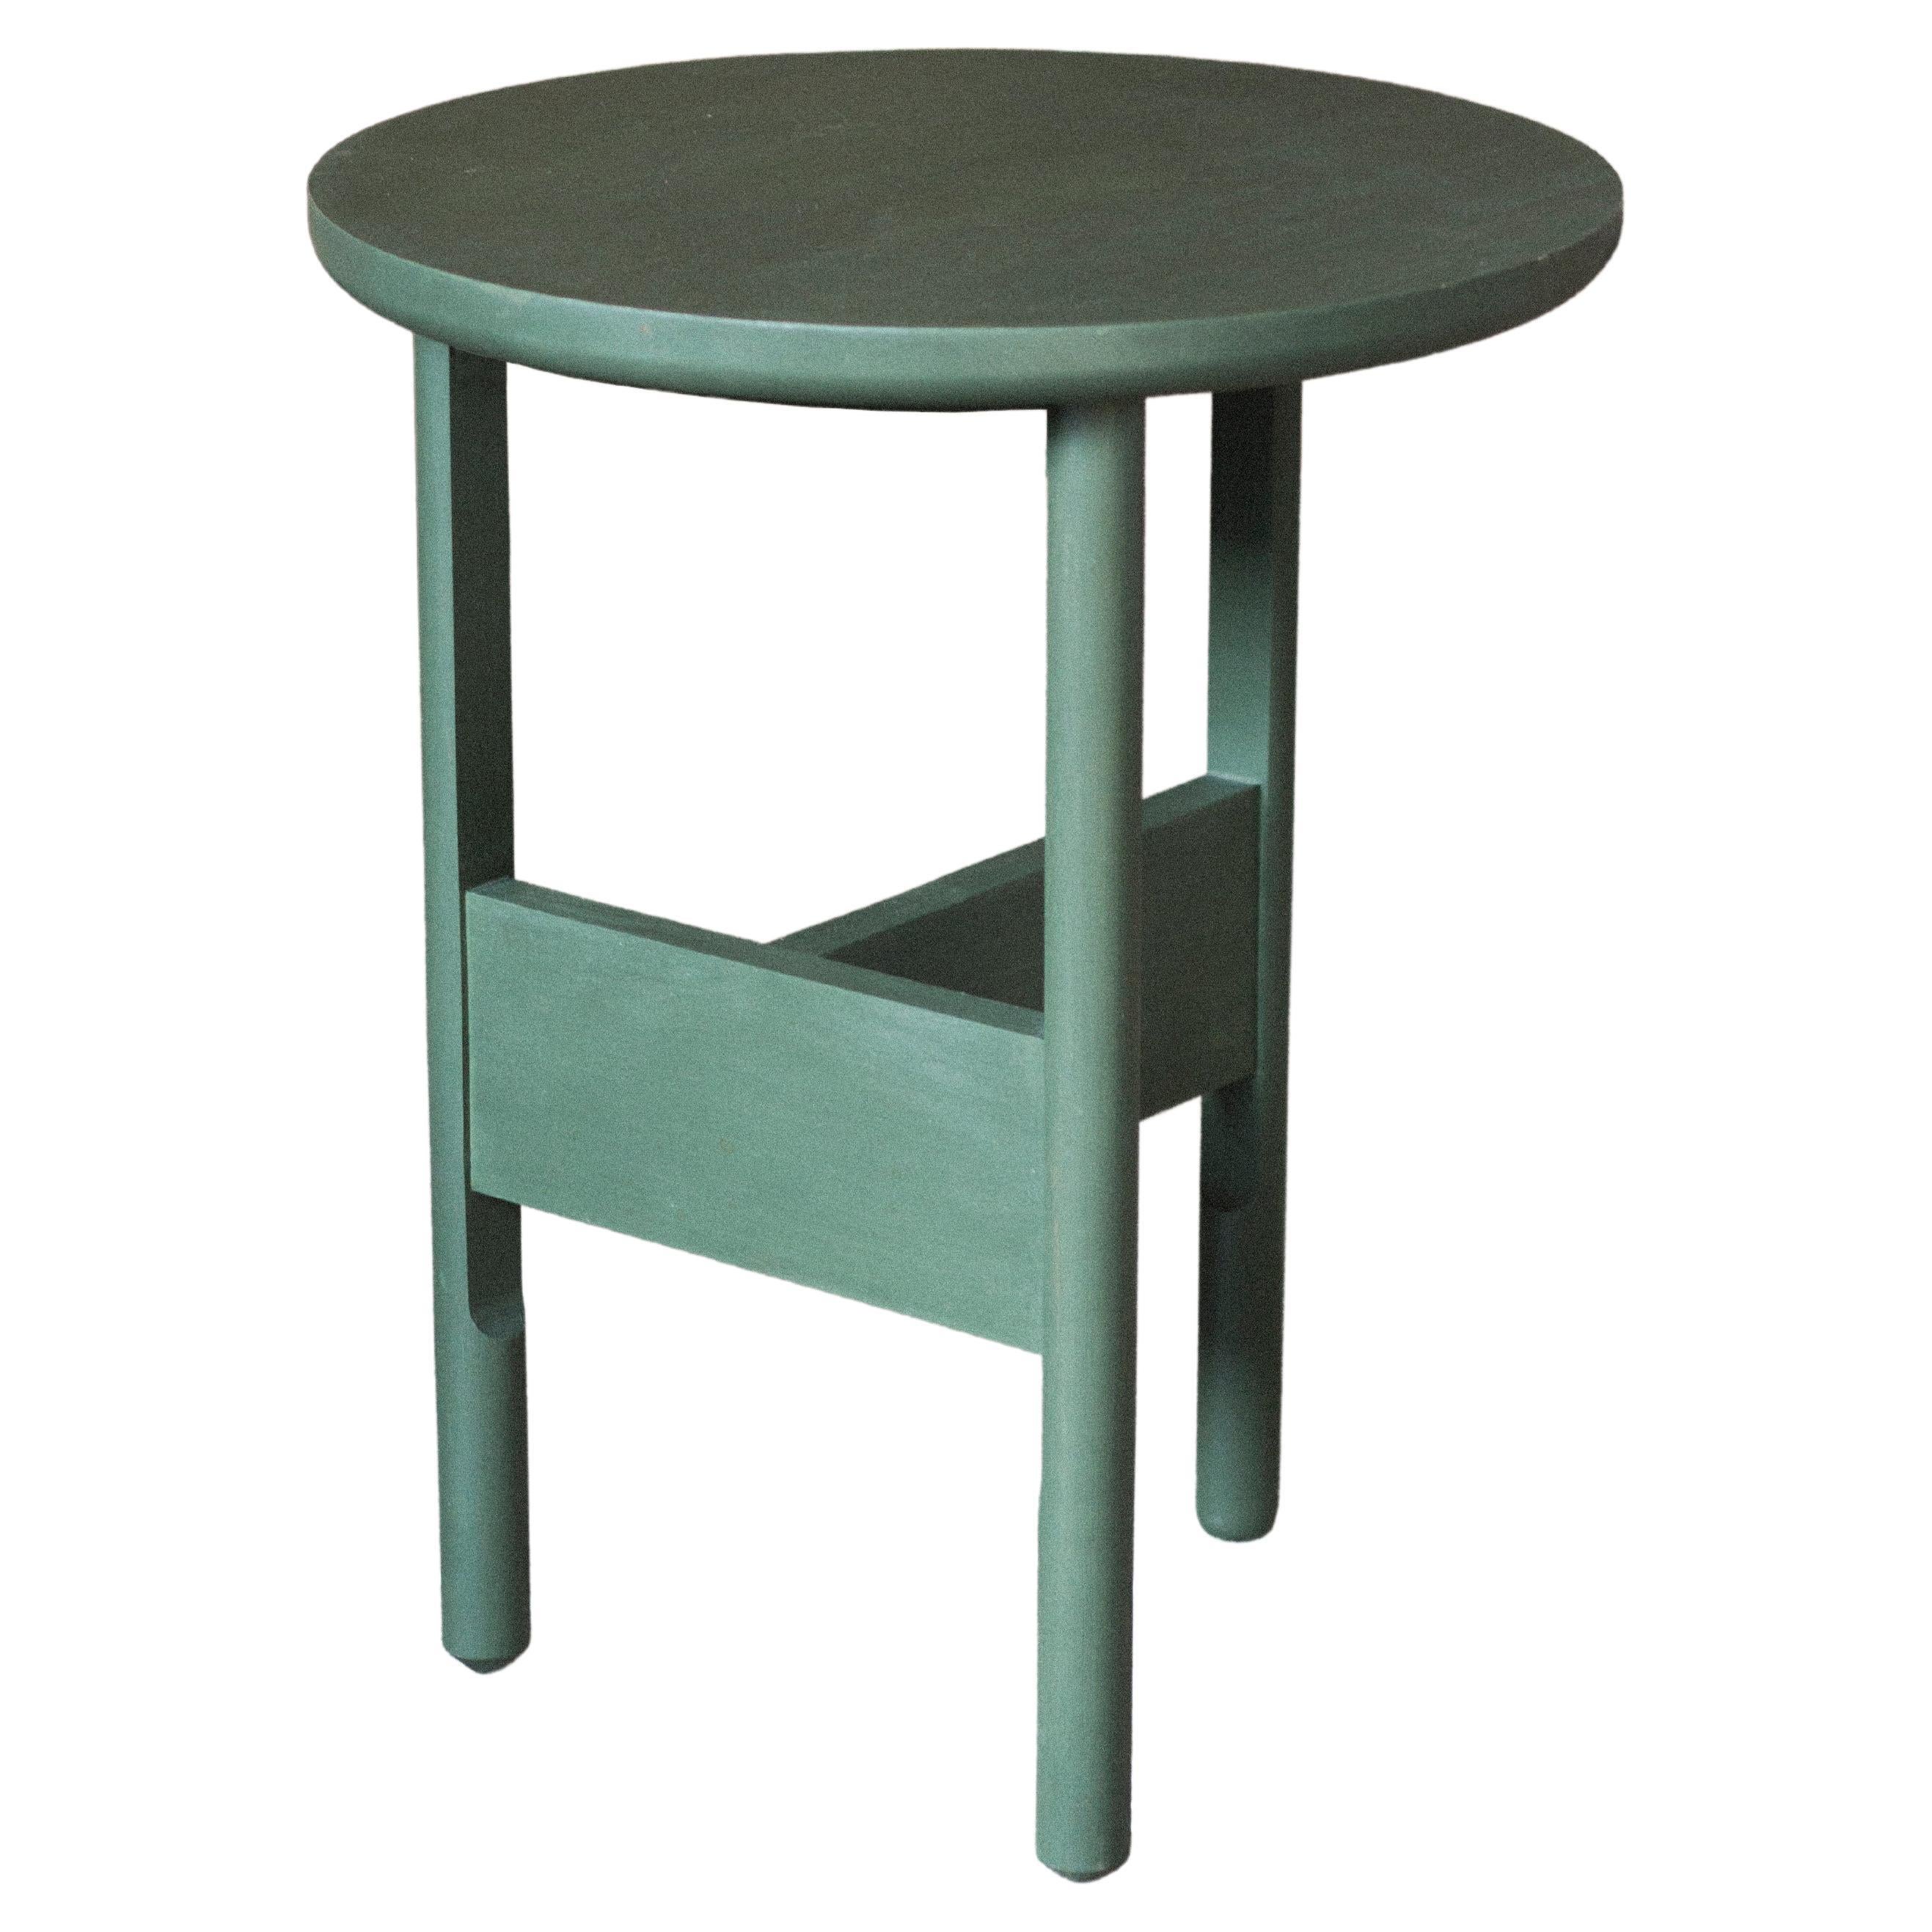 Handmade Hanne Side Table, Ø45cm - Painted - by BACD studio For Sale